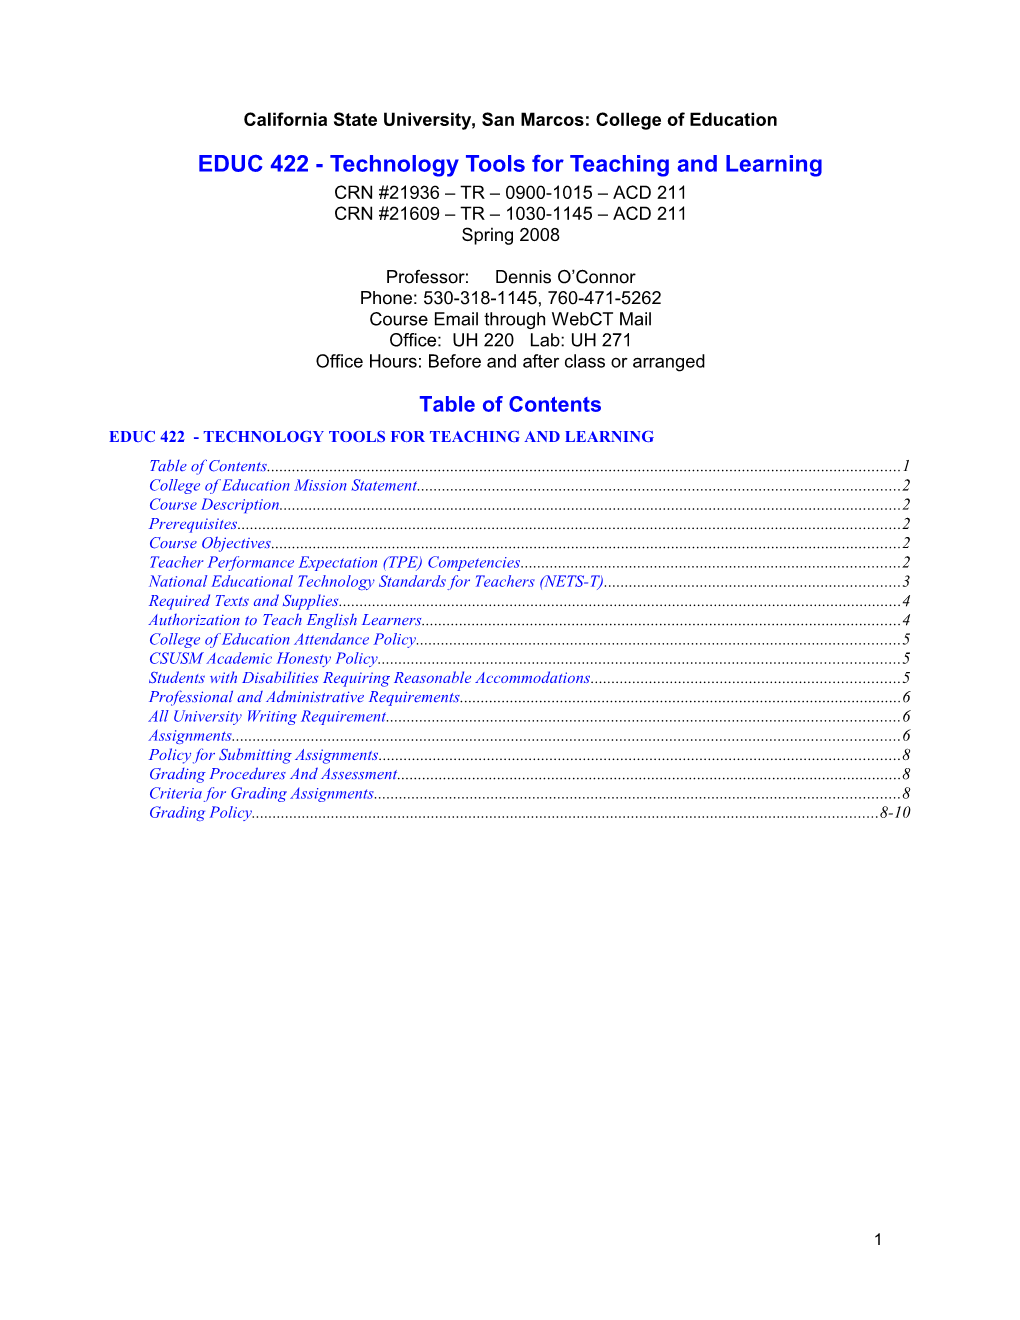 EDUC 422 - Technology Tools for Teaching and Learning